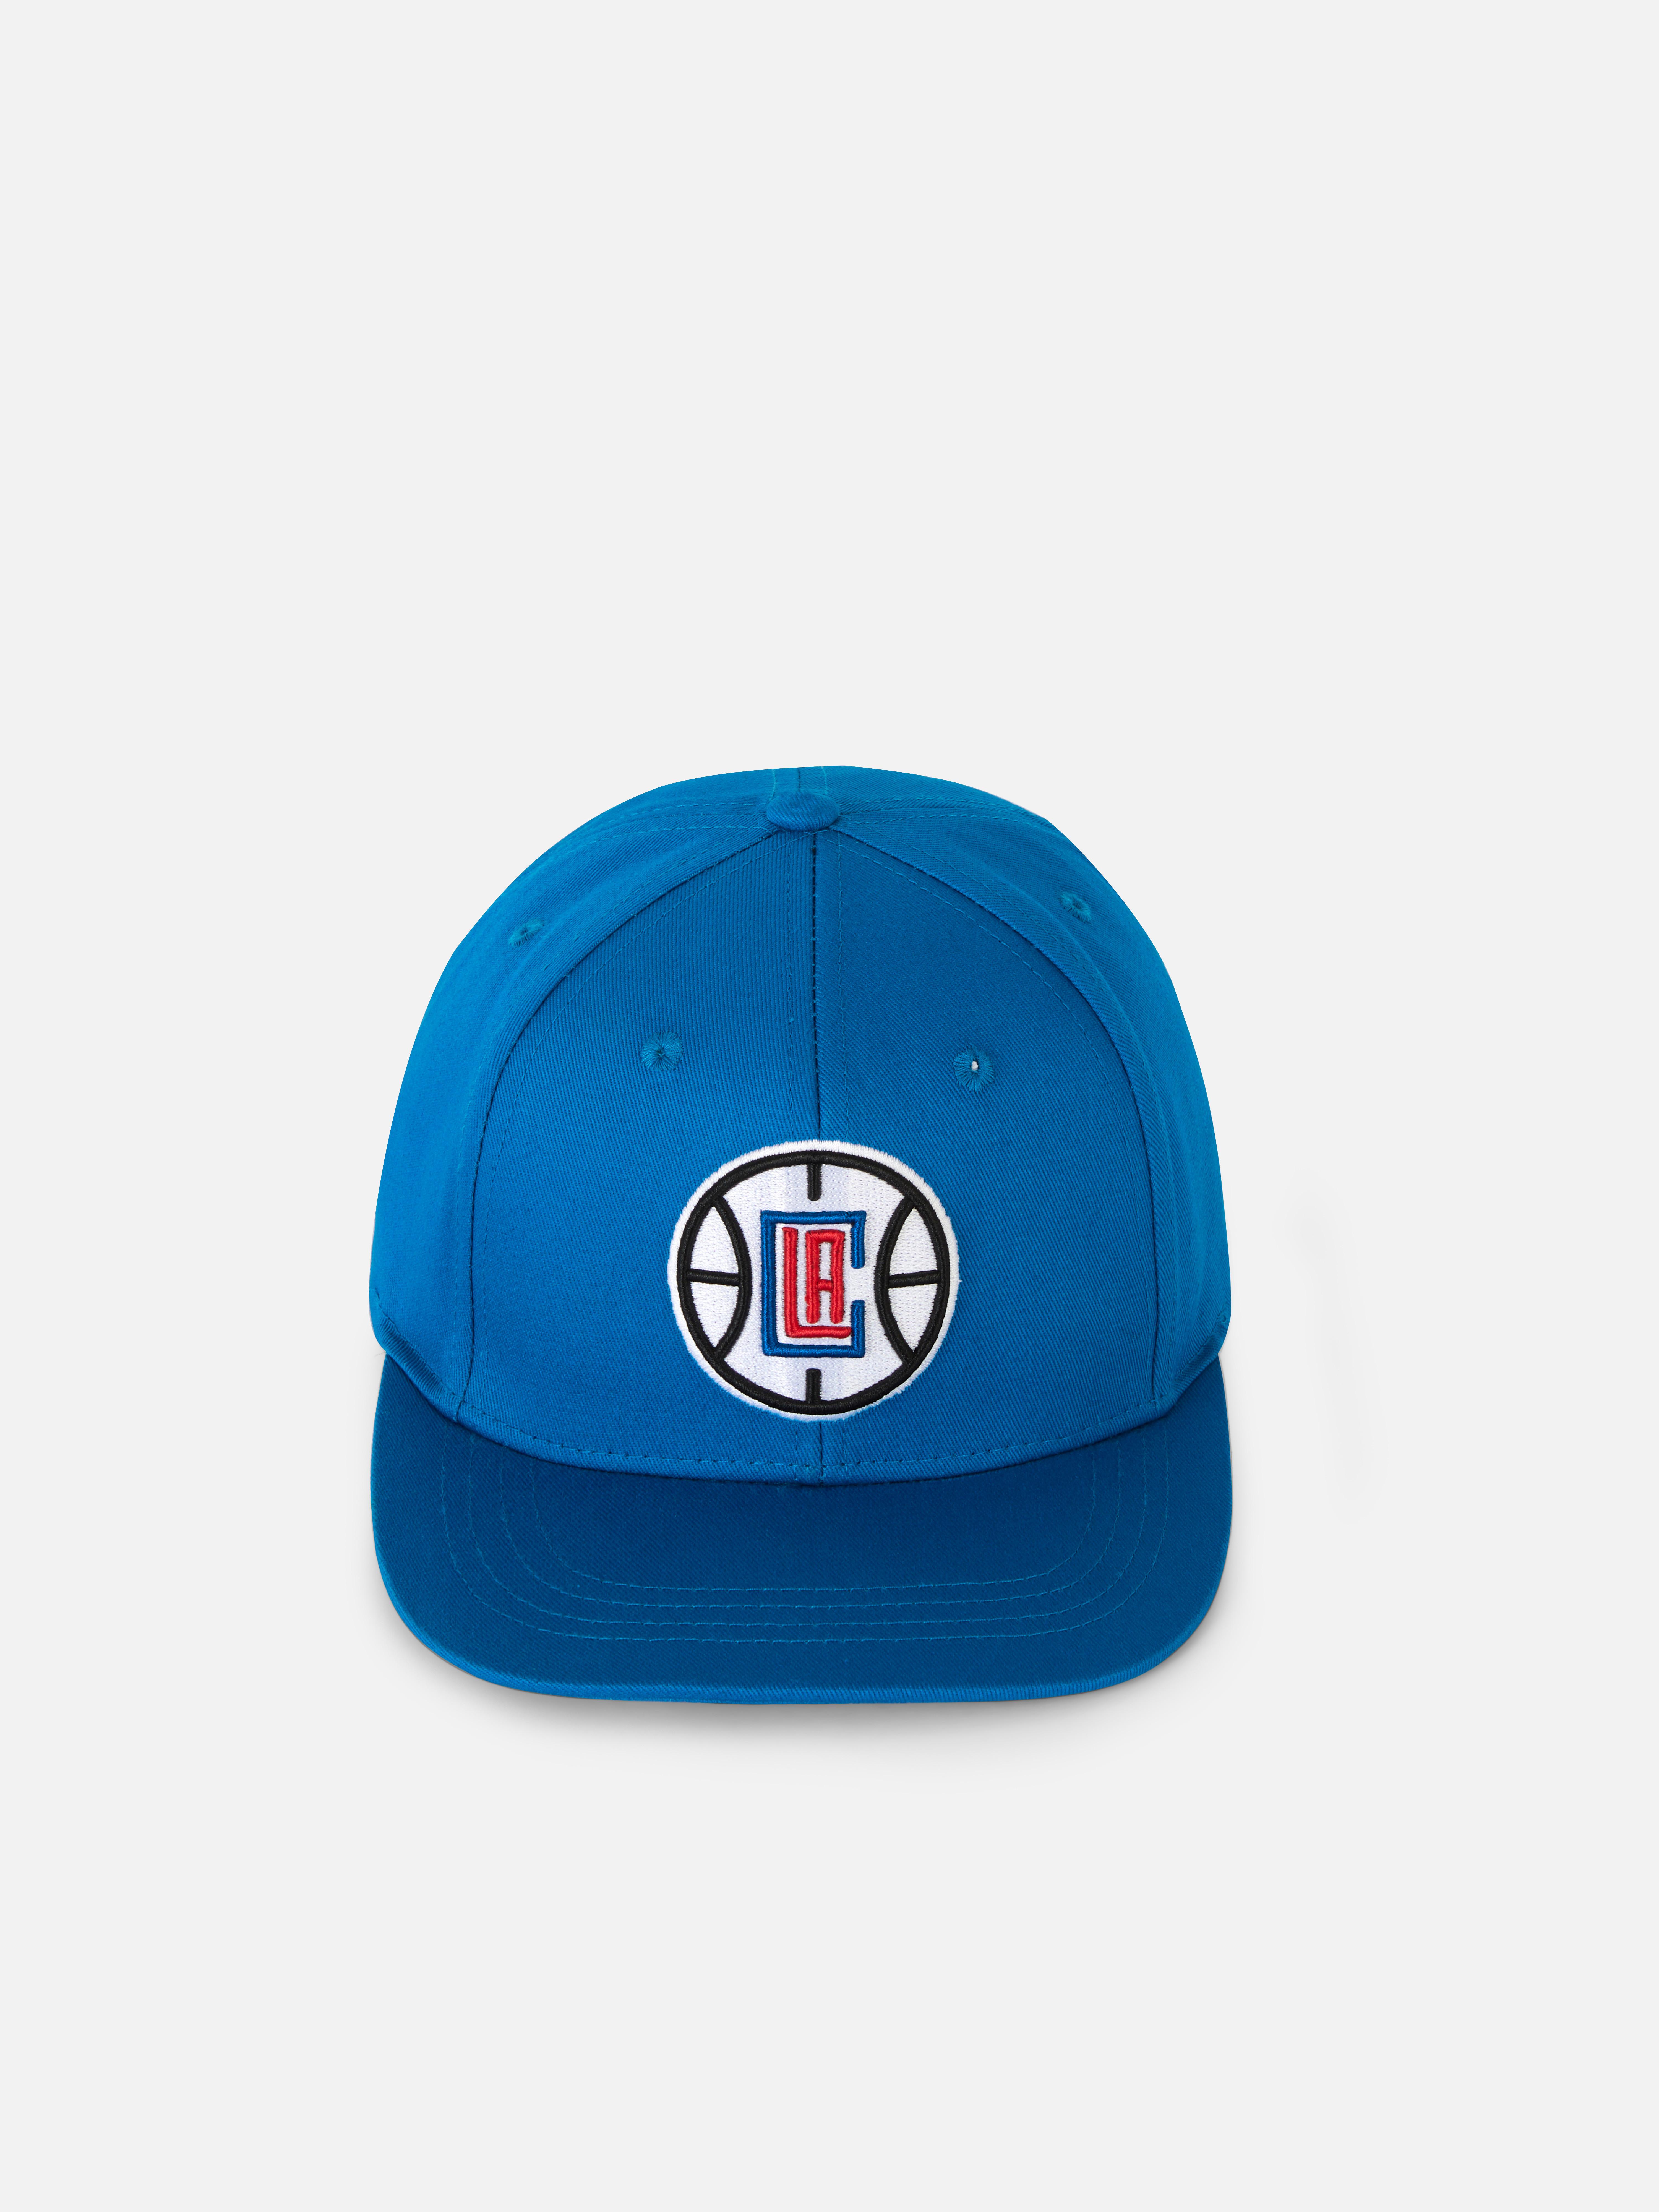 NBA Los Angeles Clippers Youth Cap